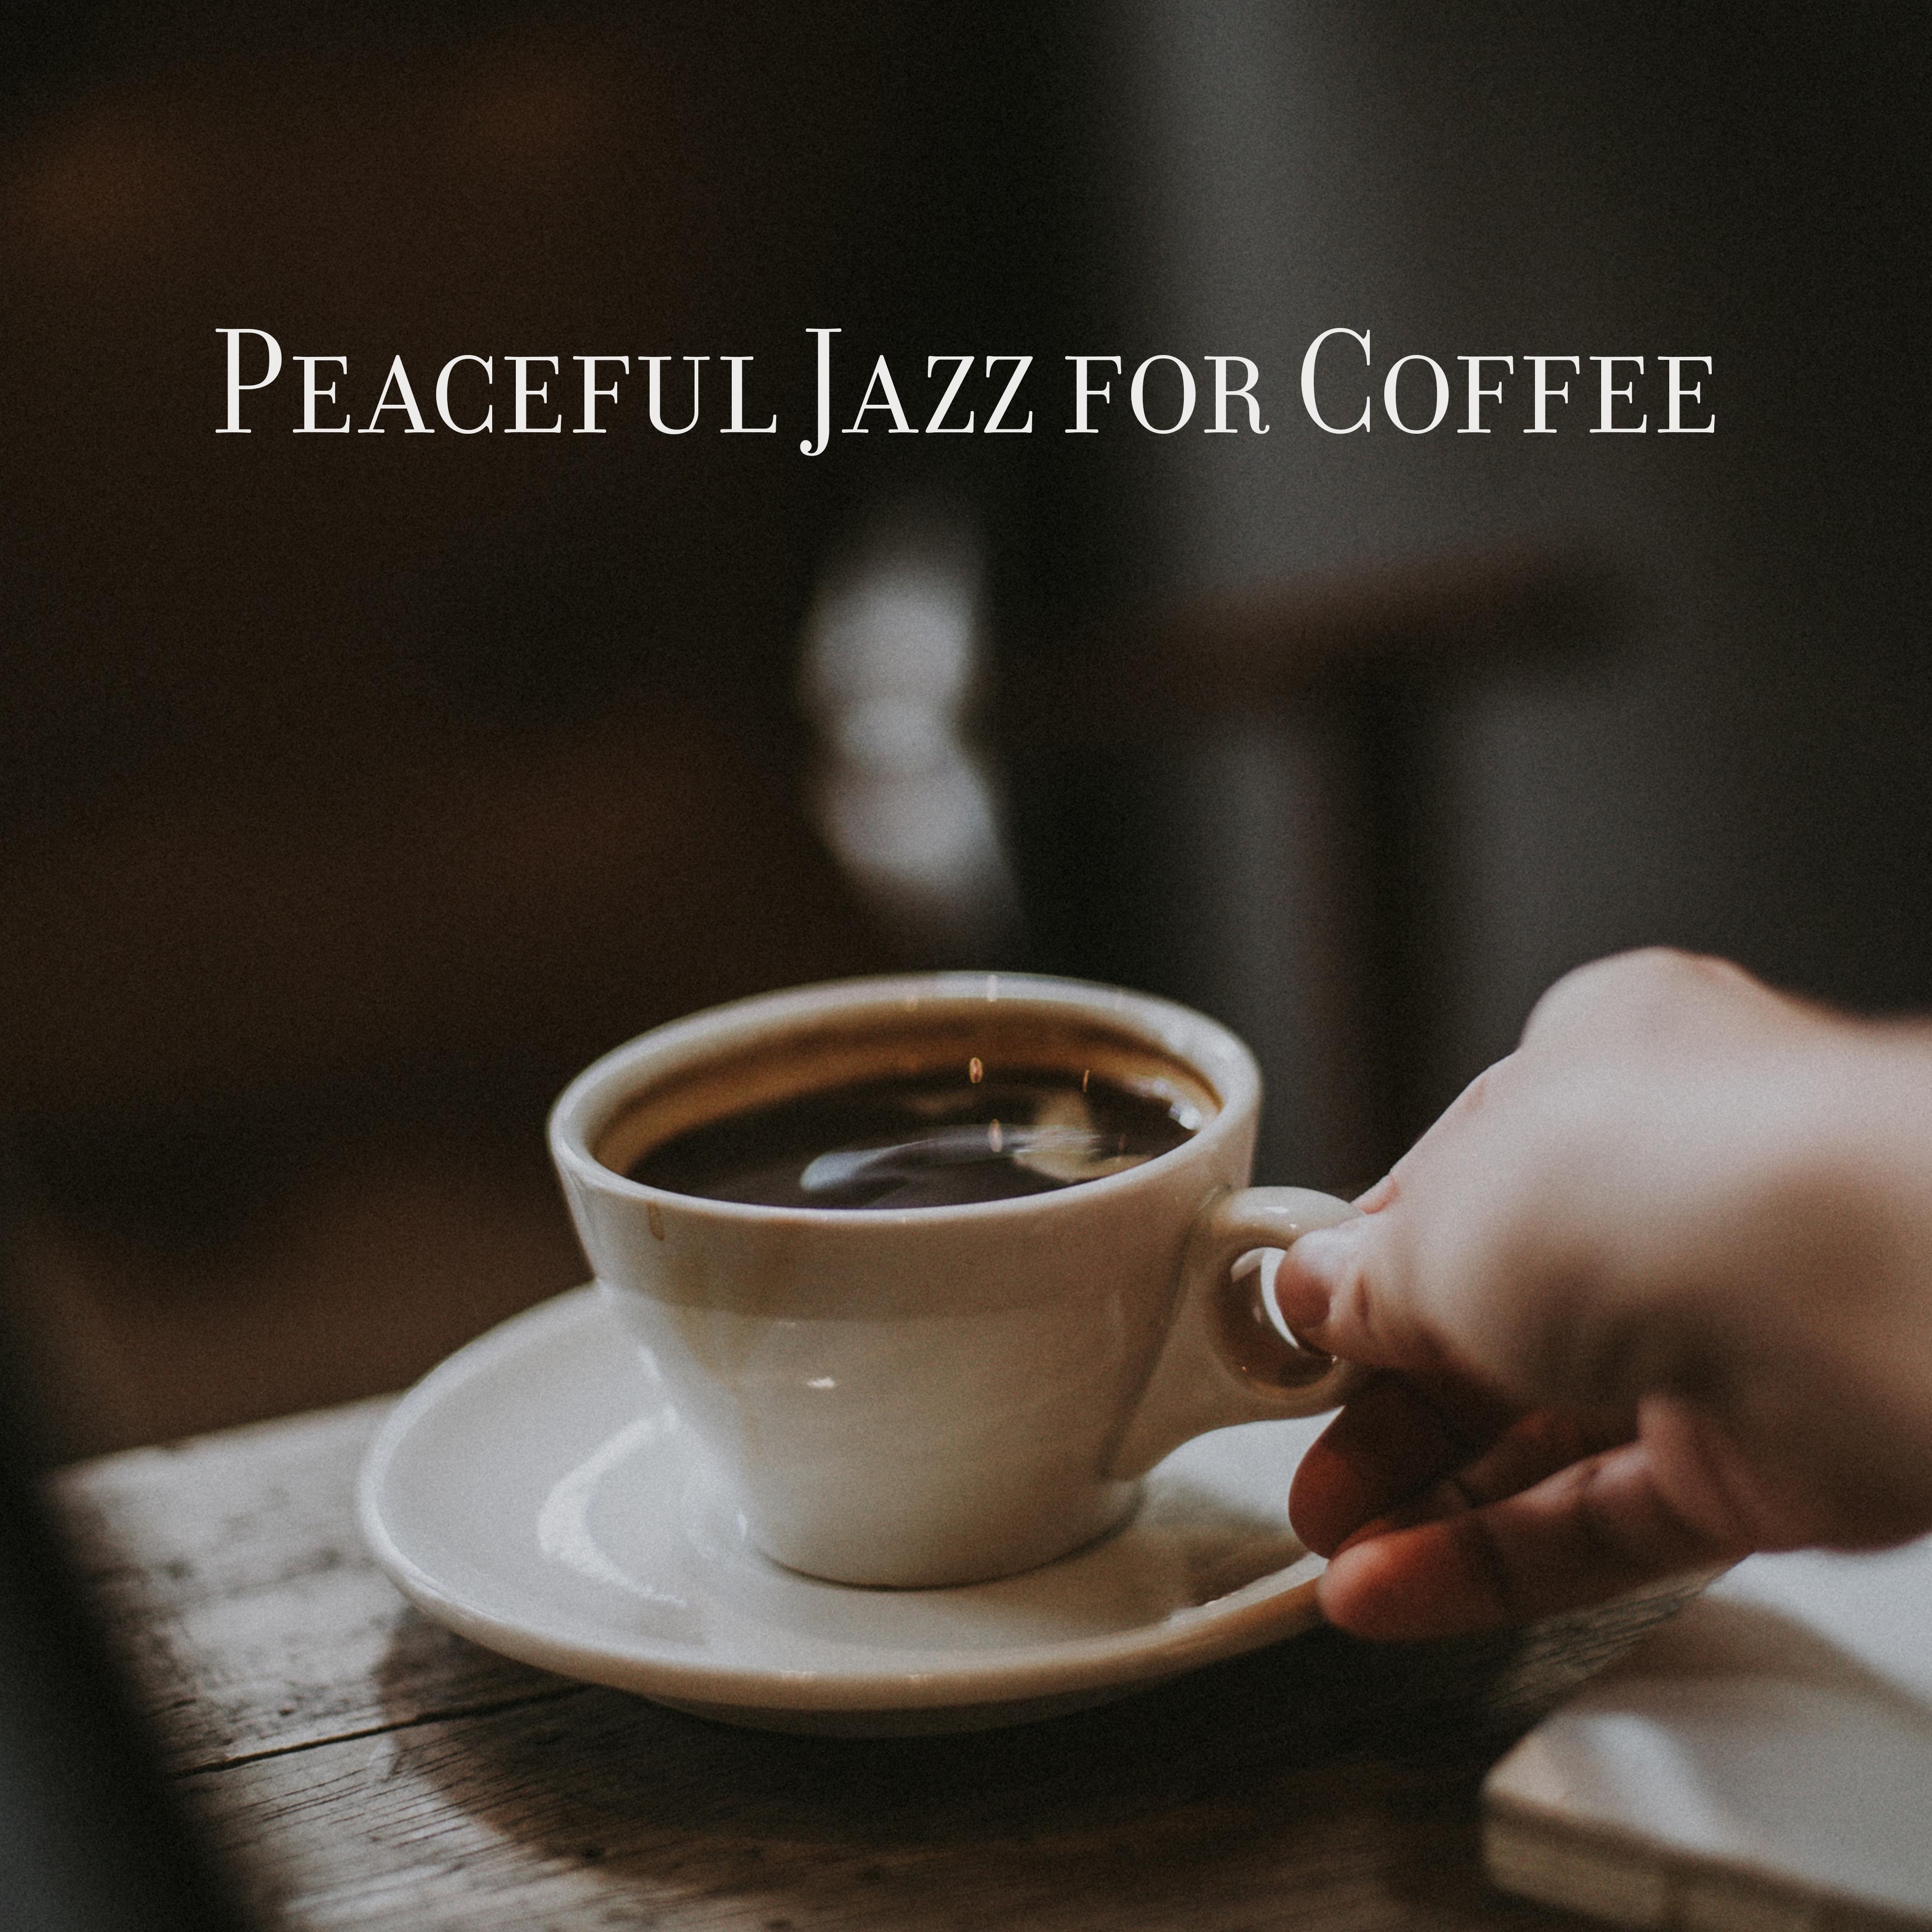 Peaceful Jazz for Coffee